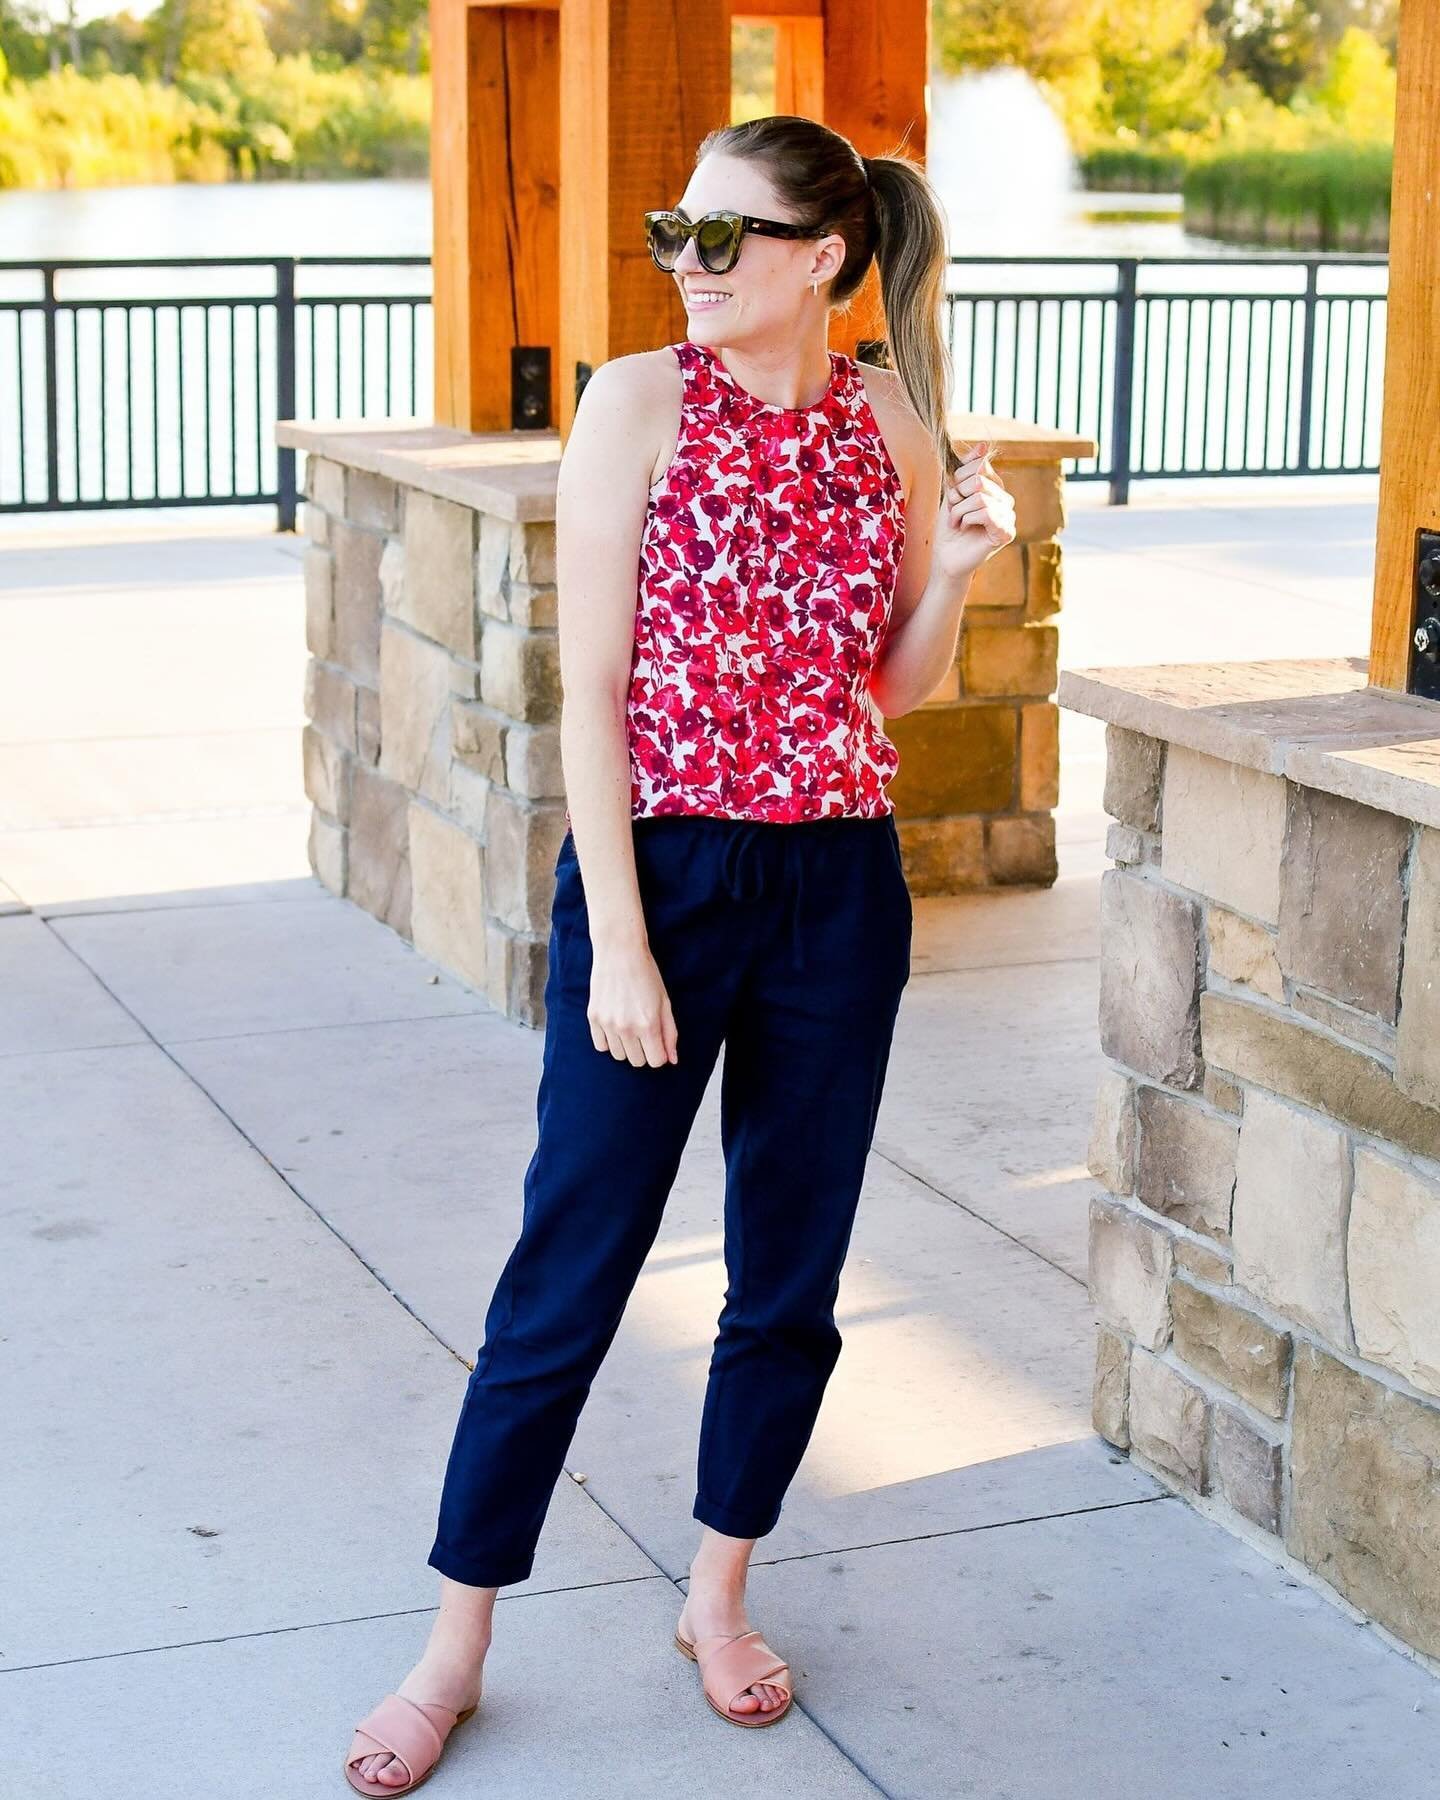 ☀️ Linen Pants Outfit Ideas ☀️ It&rsquo;s just about time to pull out all the linen things! Linen (and linen-blend) pants are the quintessential spring/summer pants, and I rounded up 15 outfit ideas featuring linen pants on CCCH. 

You can wear them 